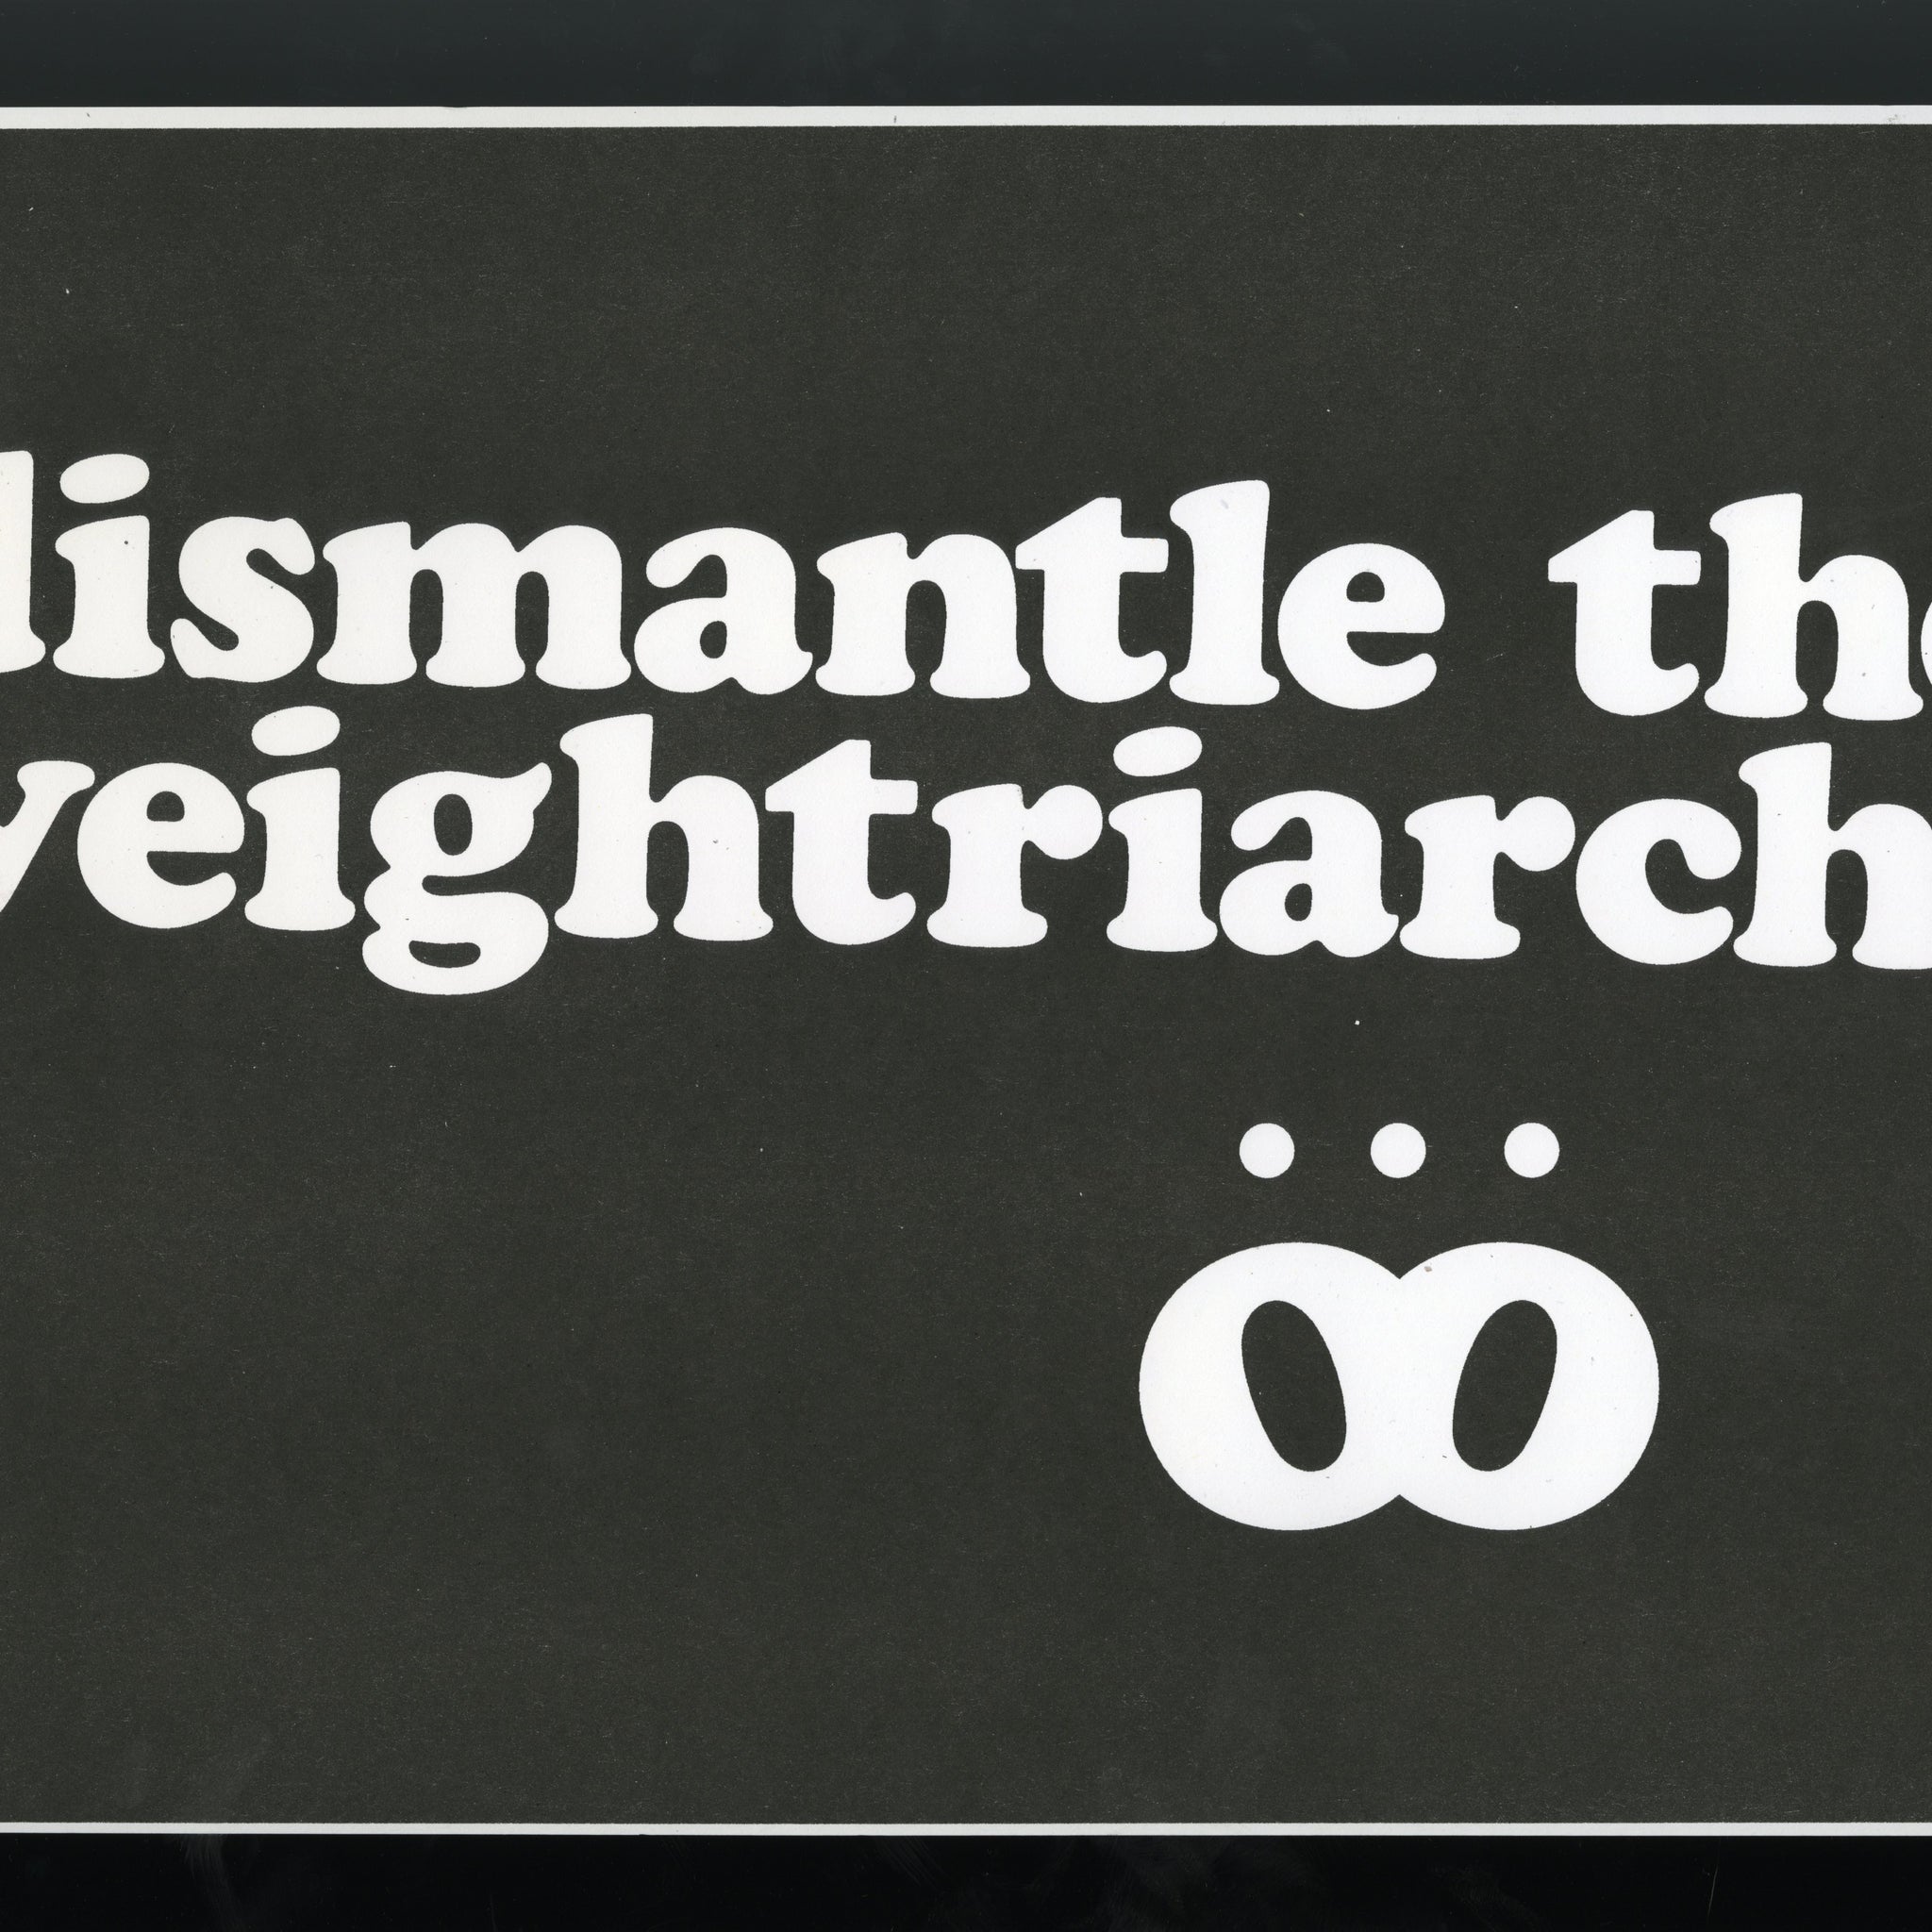 Dismantle the Weightriarchy Poster